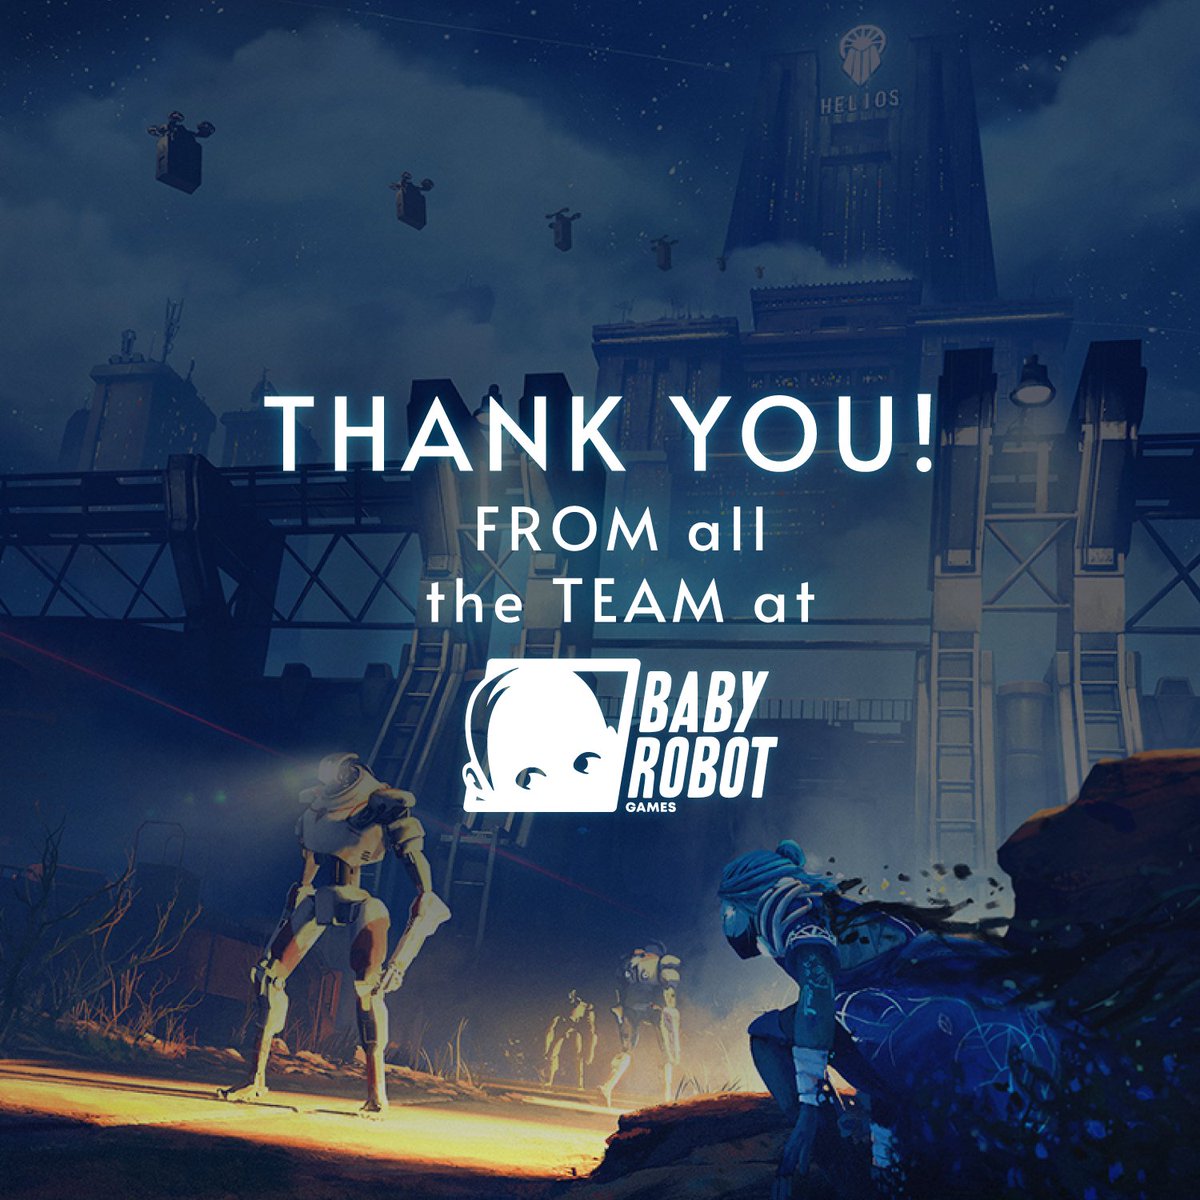 From all the team at Baby Robot Games, thank you so much for your support throughout these 5 years. To the community, everyone involved in the project somehow, our friends and families. With its ups and downs, this has been an incredible journey! We hope you enjoy the game 💙